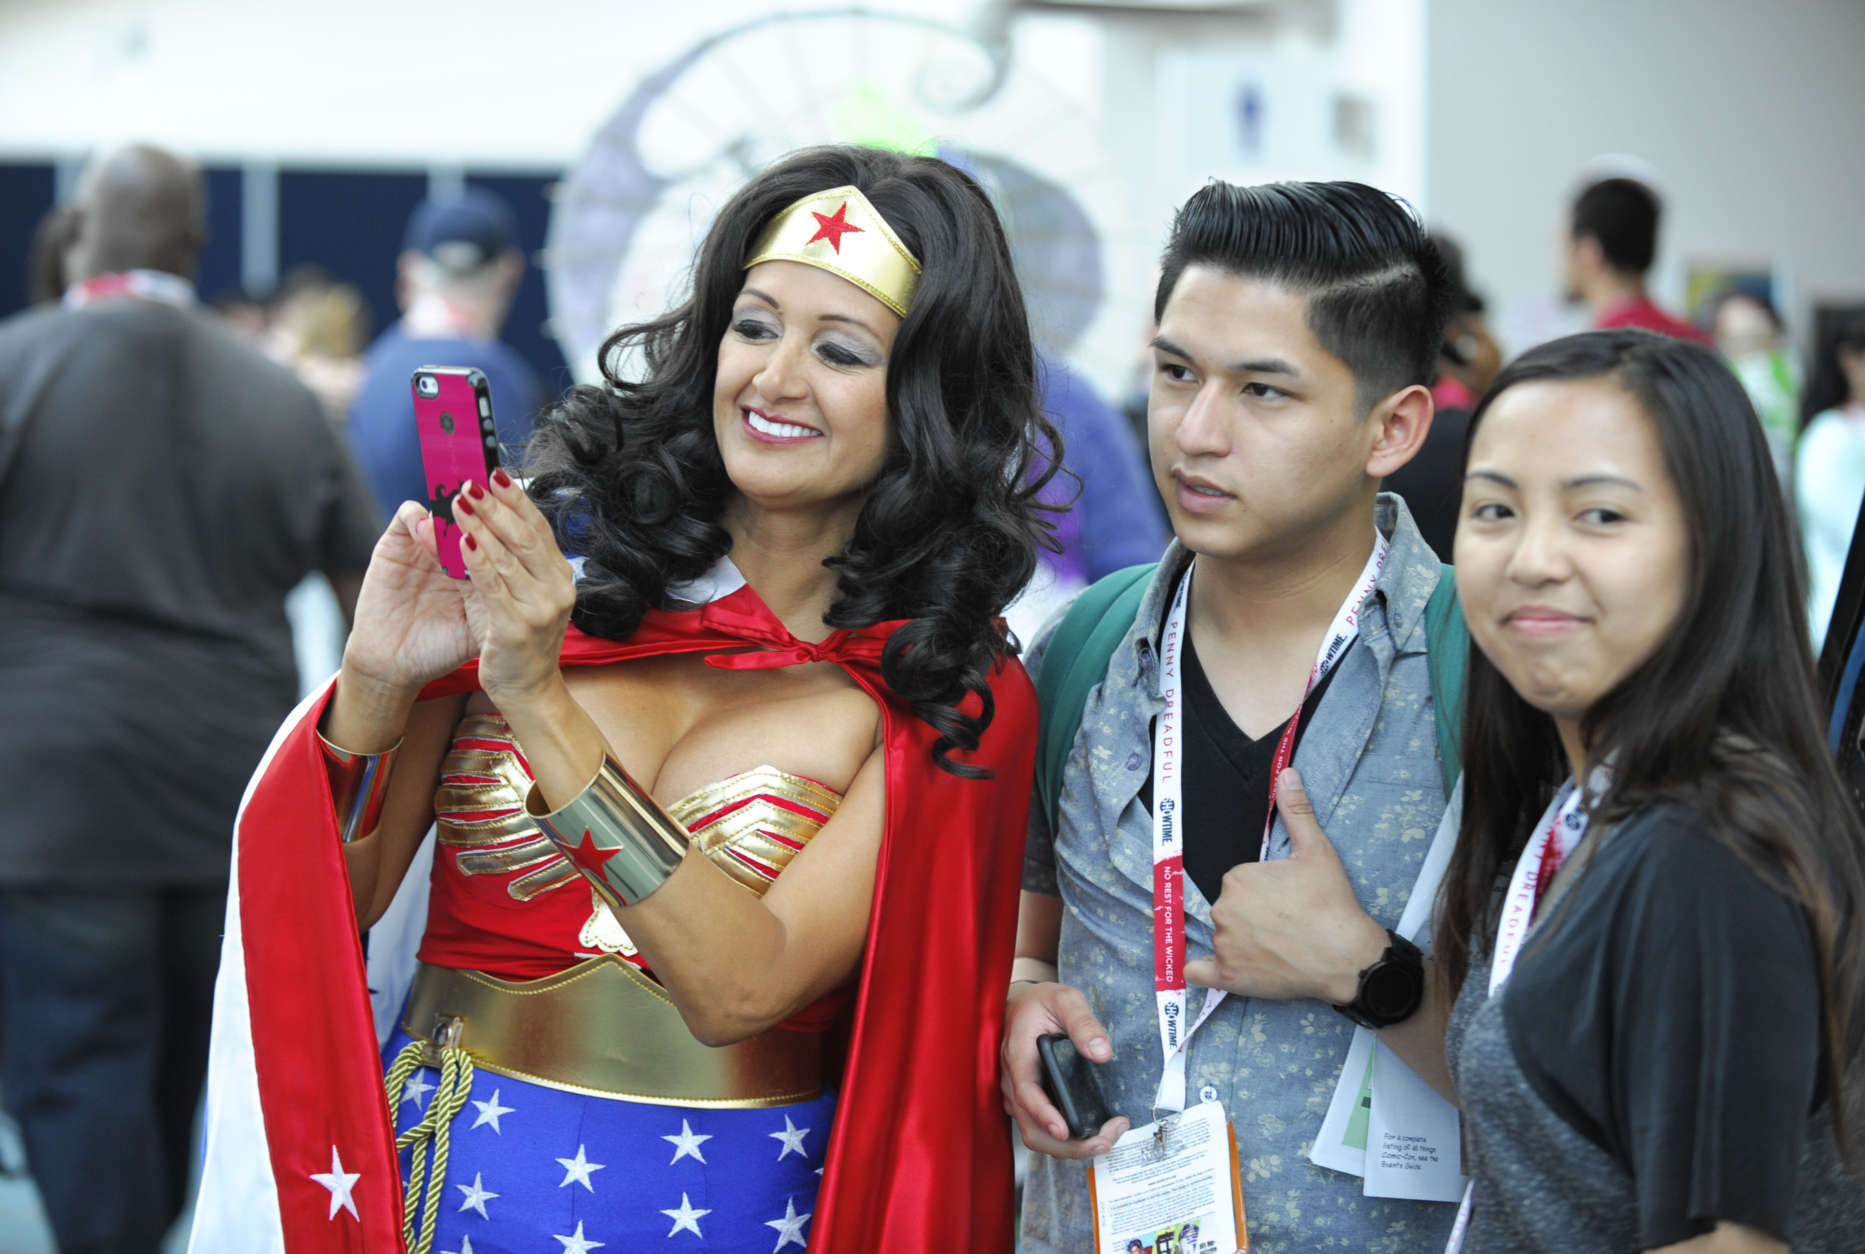 Michelle Camarillo, dressed as Wonder Woman, looks at a selfie on the second day of the 2015 Comic-Con International held at the San Diego Convention Center Friday, July 10, 2015, in San Diego.  The pop-culture event runs July 9-12.  (Photo by Denis Poroy/Invision/AP)